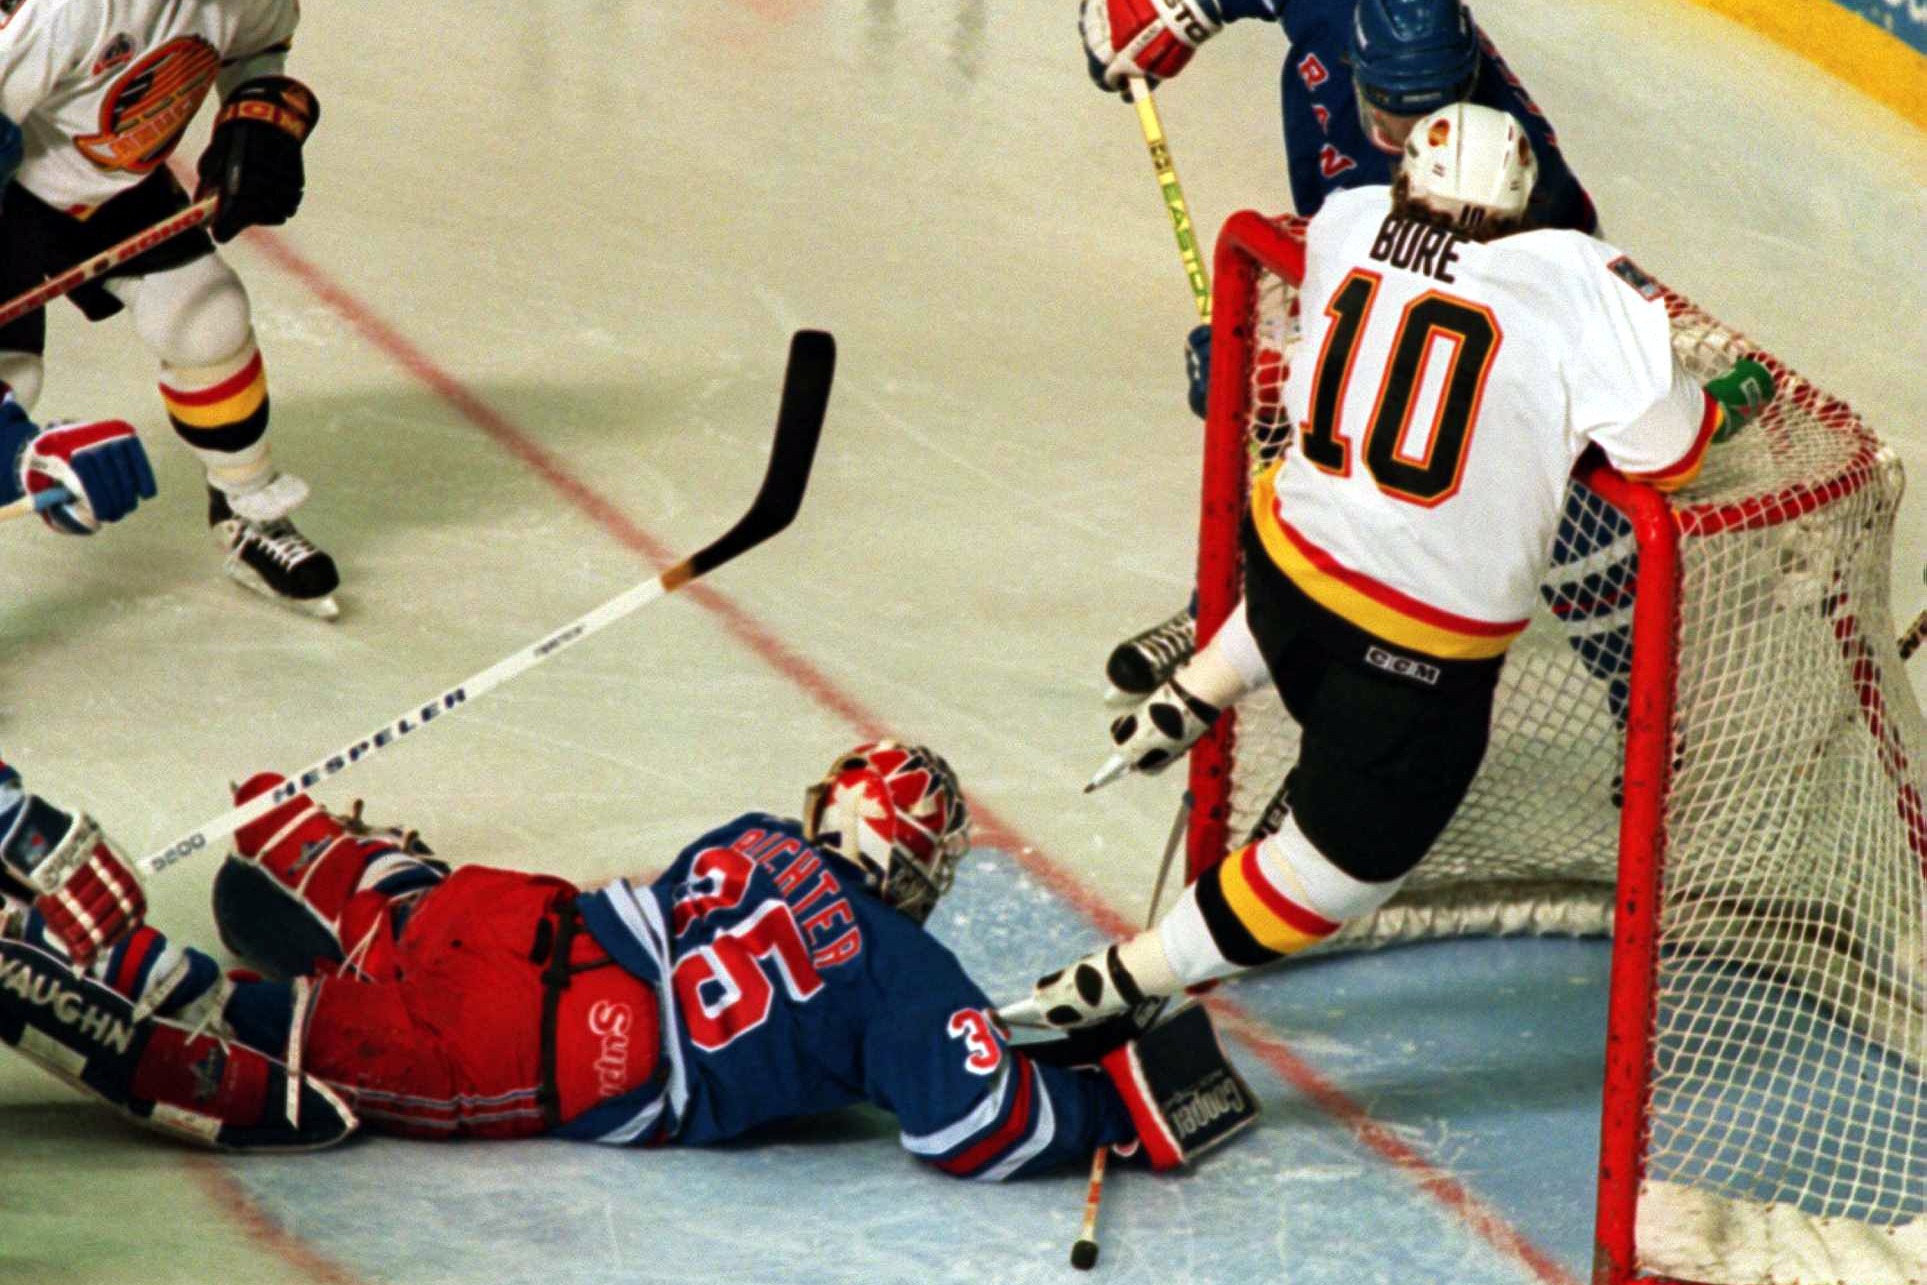 Pavel Bure (Ice Hockey Great) - On This Day